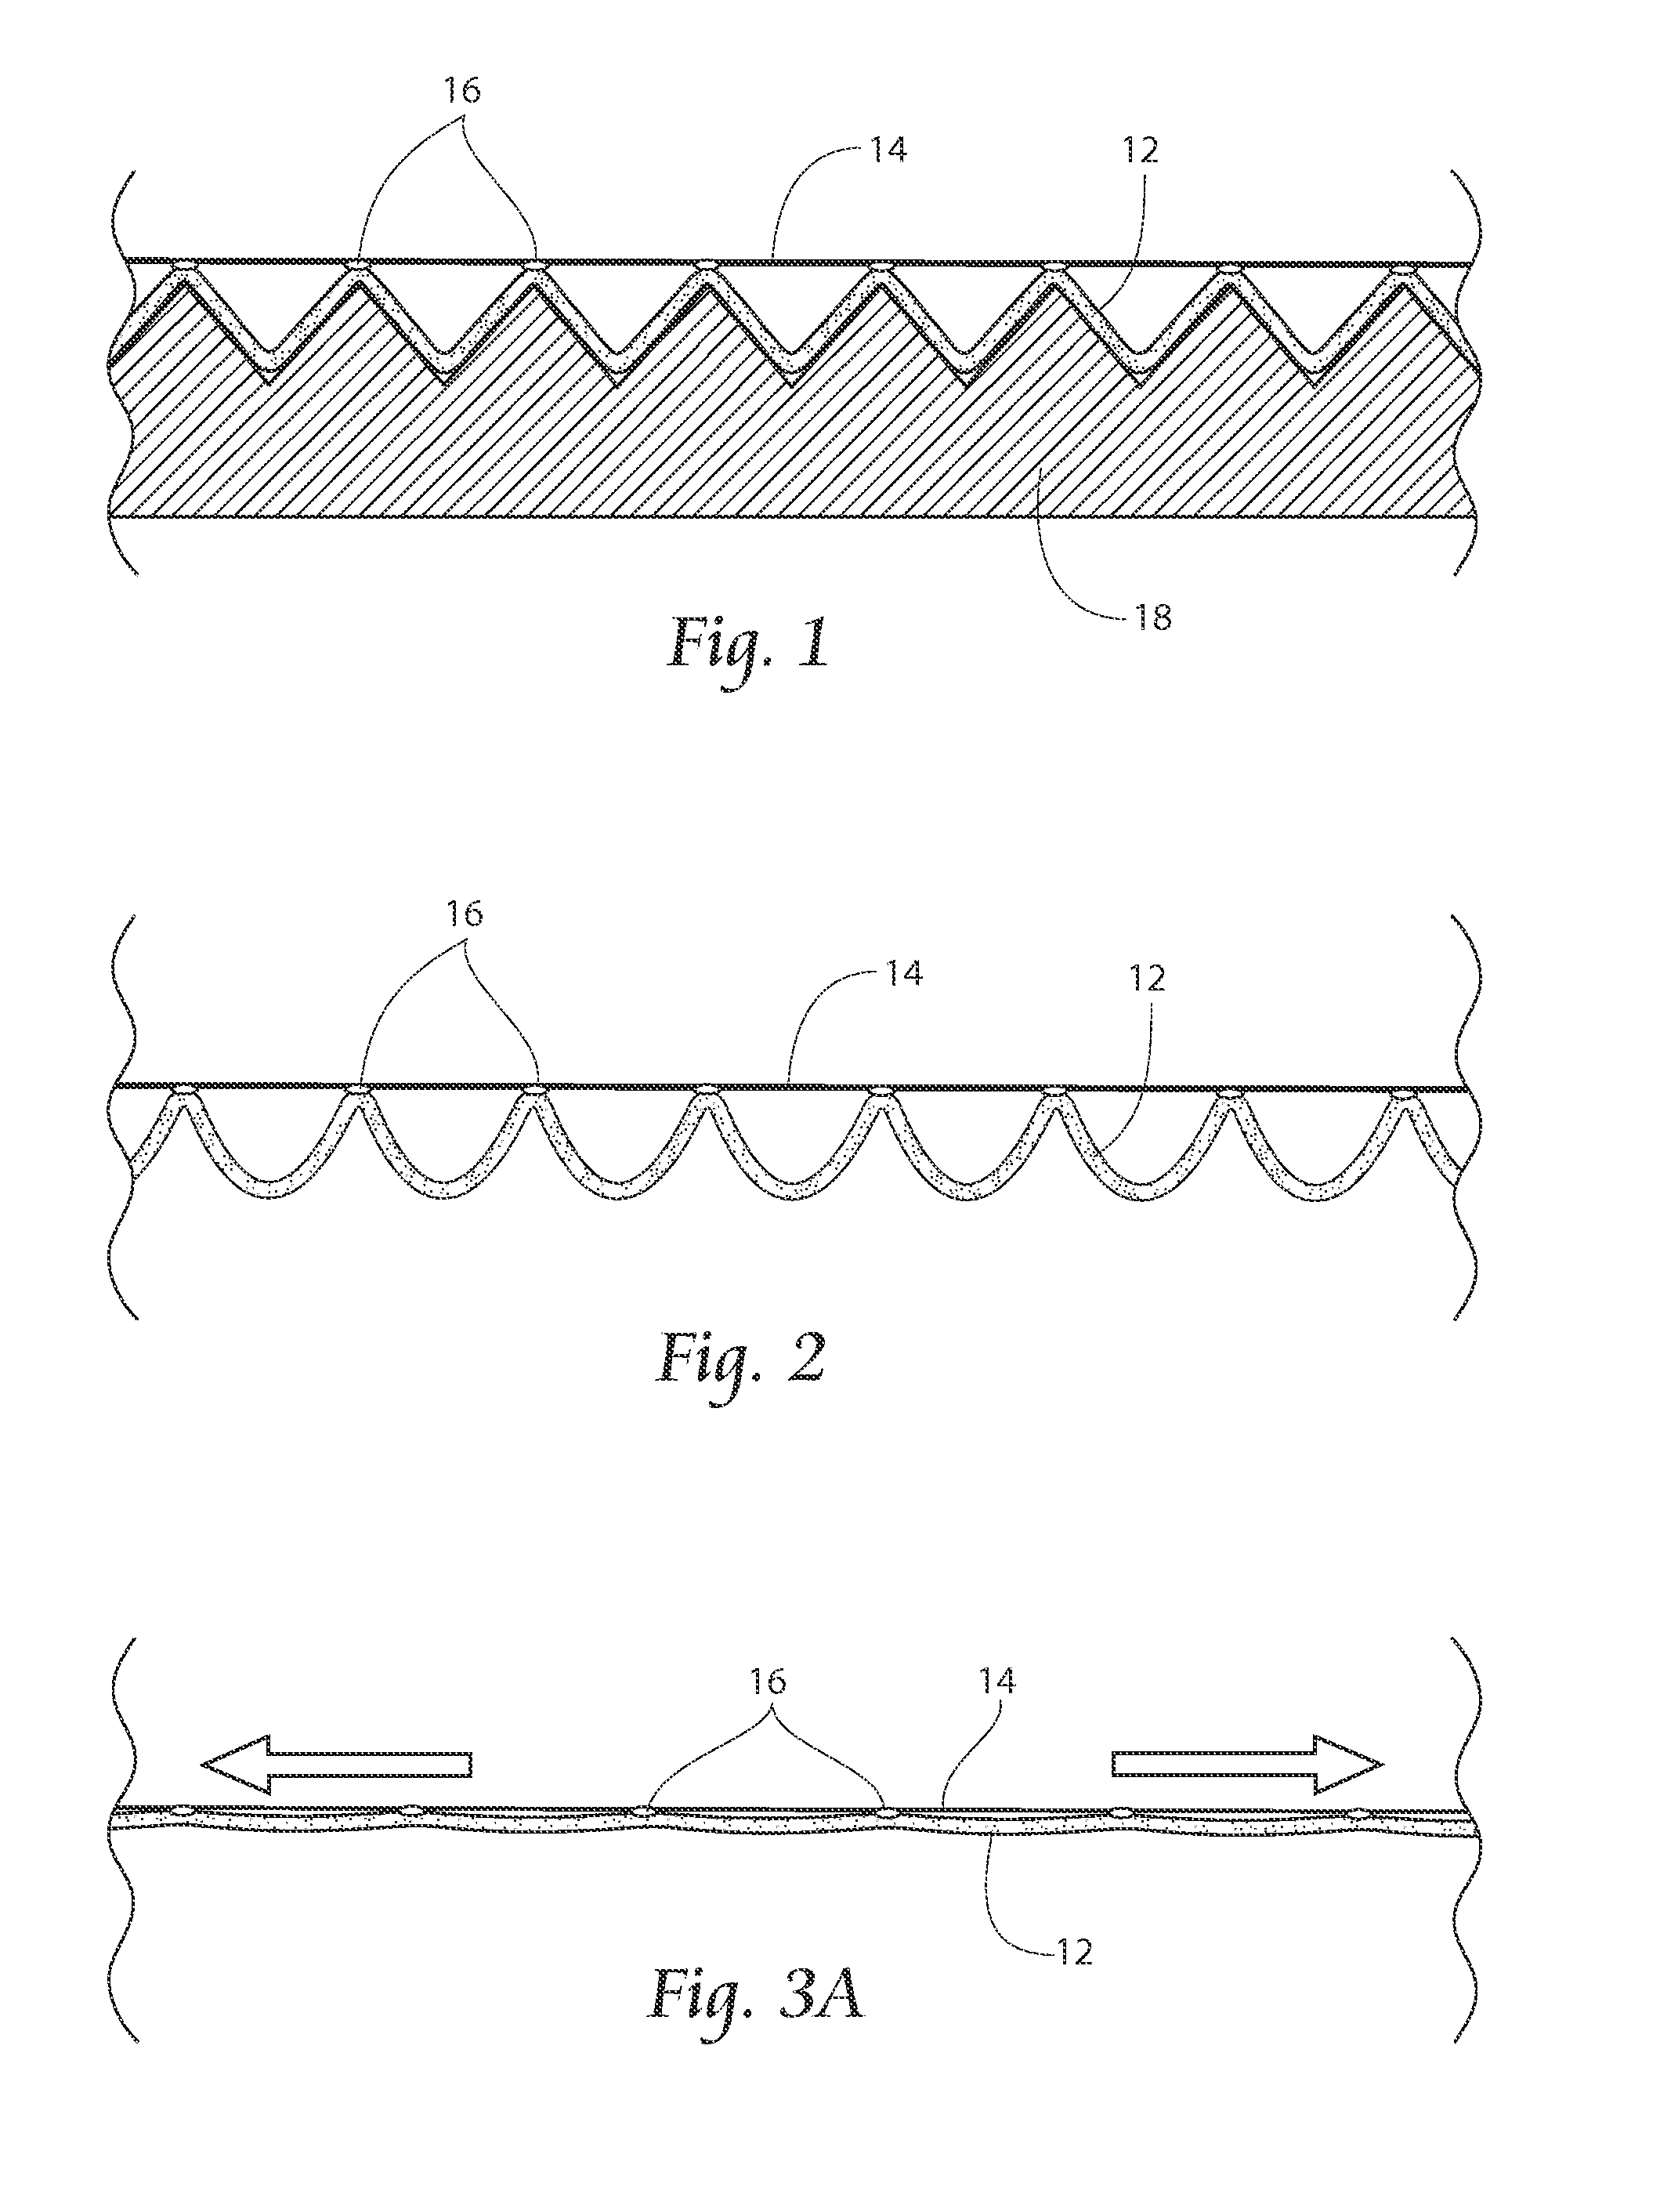 Apparatus and methods for securing elastic to a carrier web